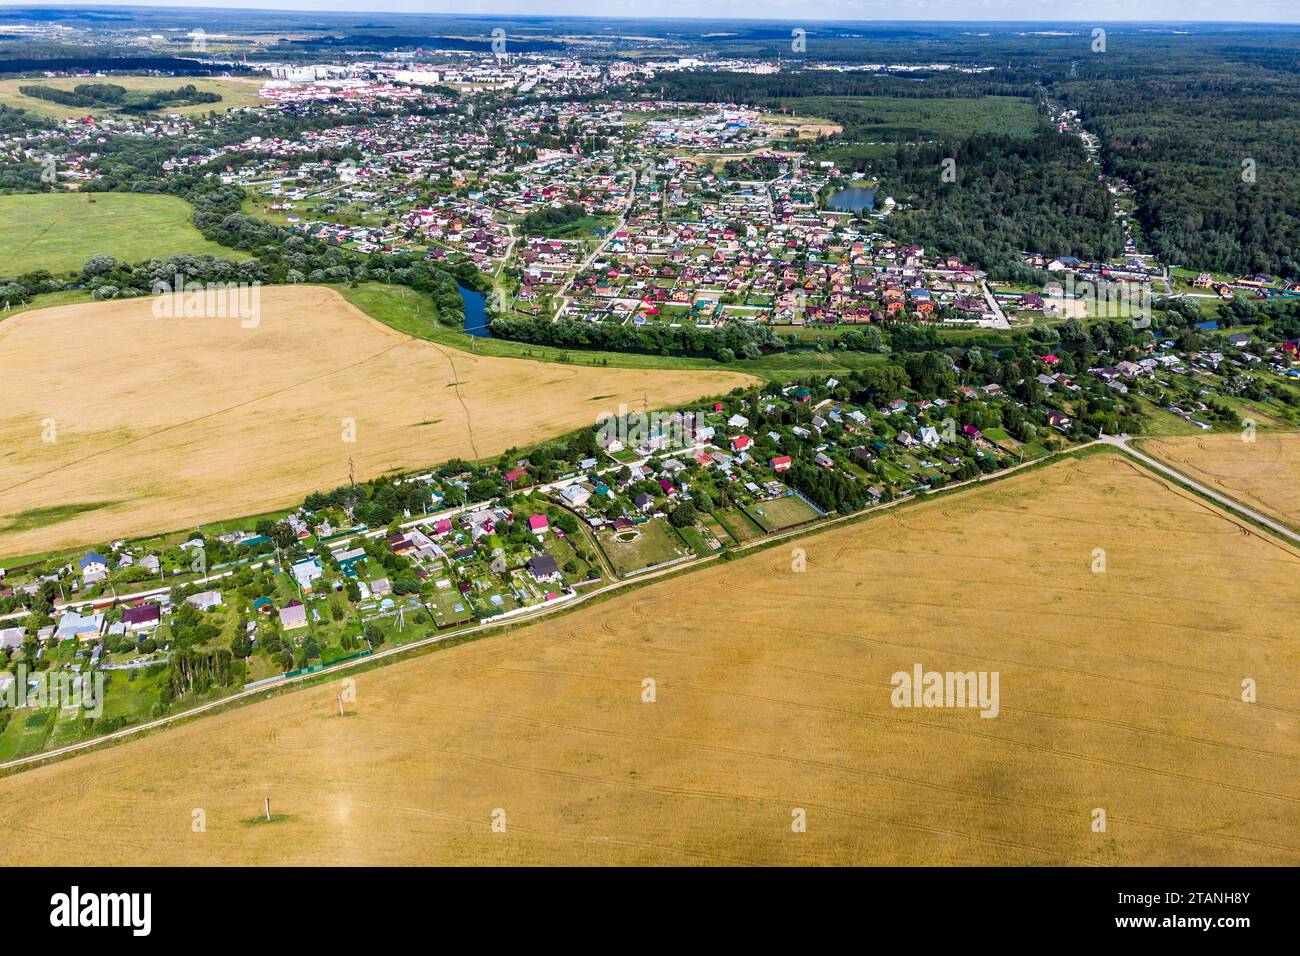 View from a high altitude of rural and rural buildings surrounded by fields and forests Stock Photo